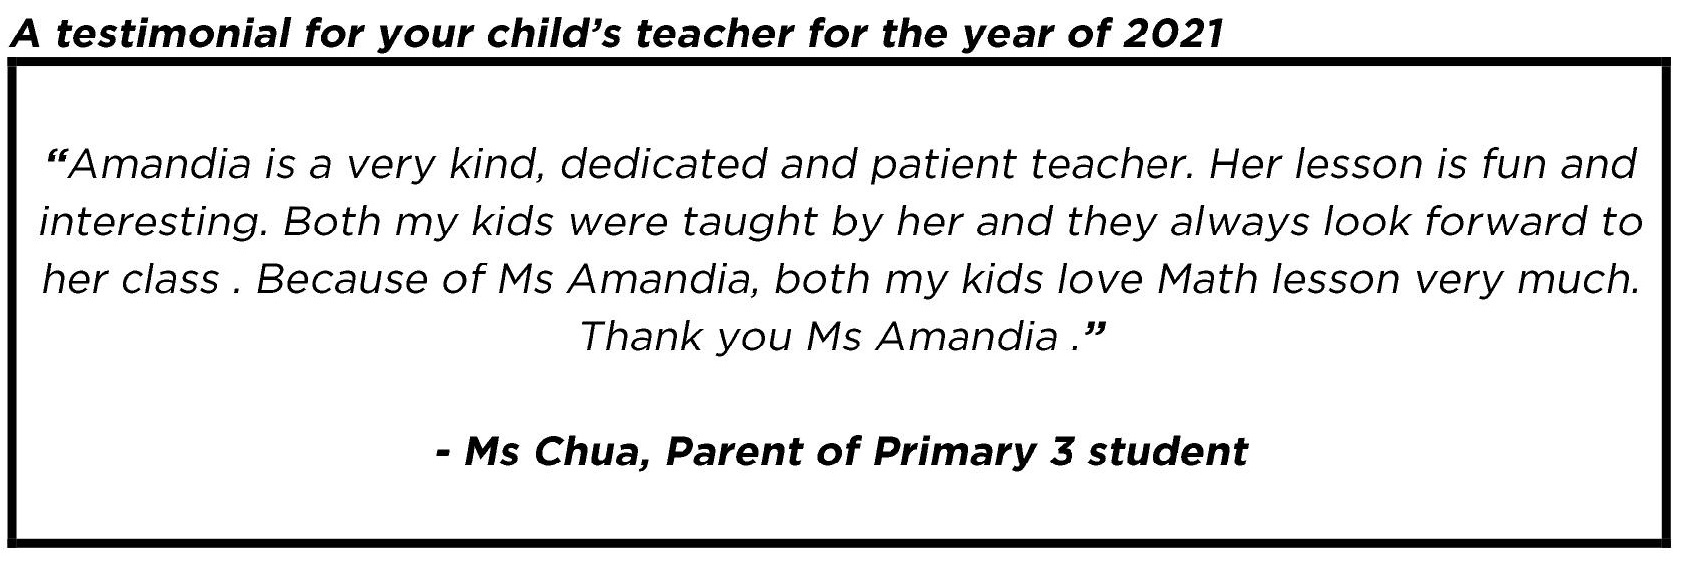 "... very kind, dedicated and patient teacher. Her lesson is fun and interesting."